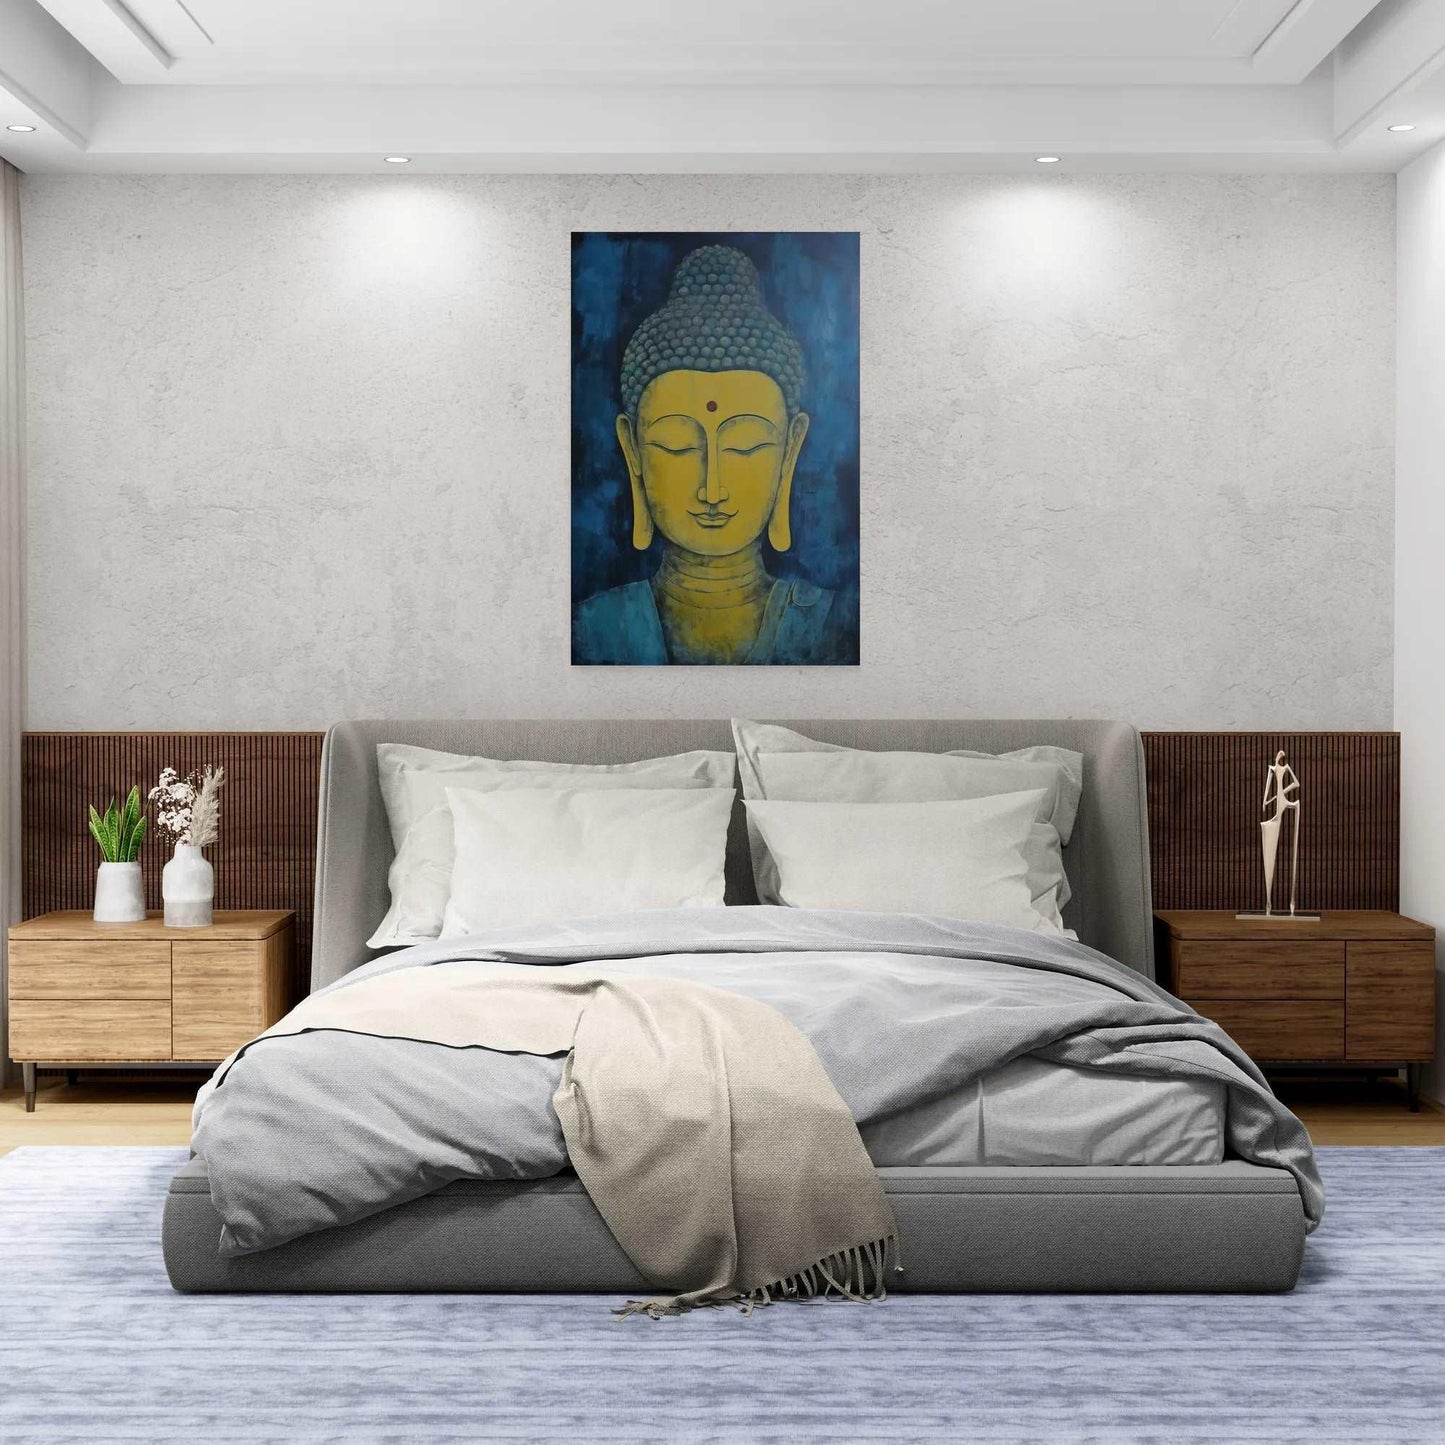 Modern bedroom featuring a Buddha head painting above a gray bed with a wooden side table, textured walls, and soft lighting.